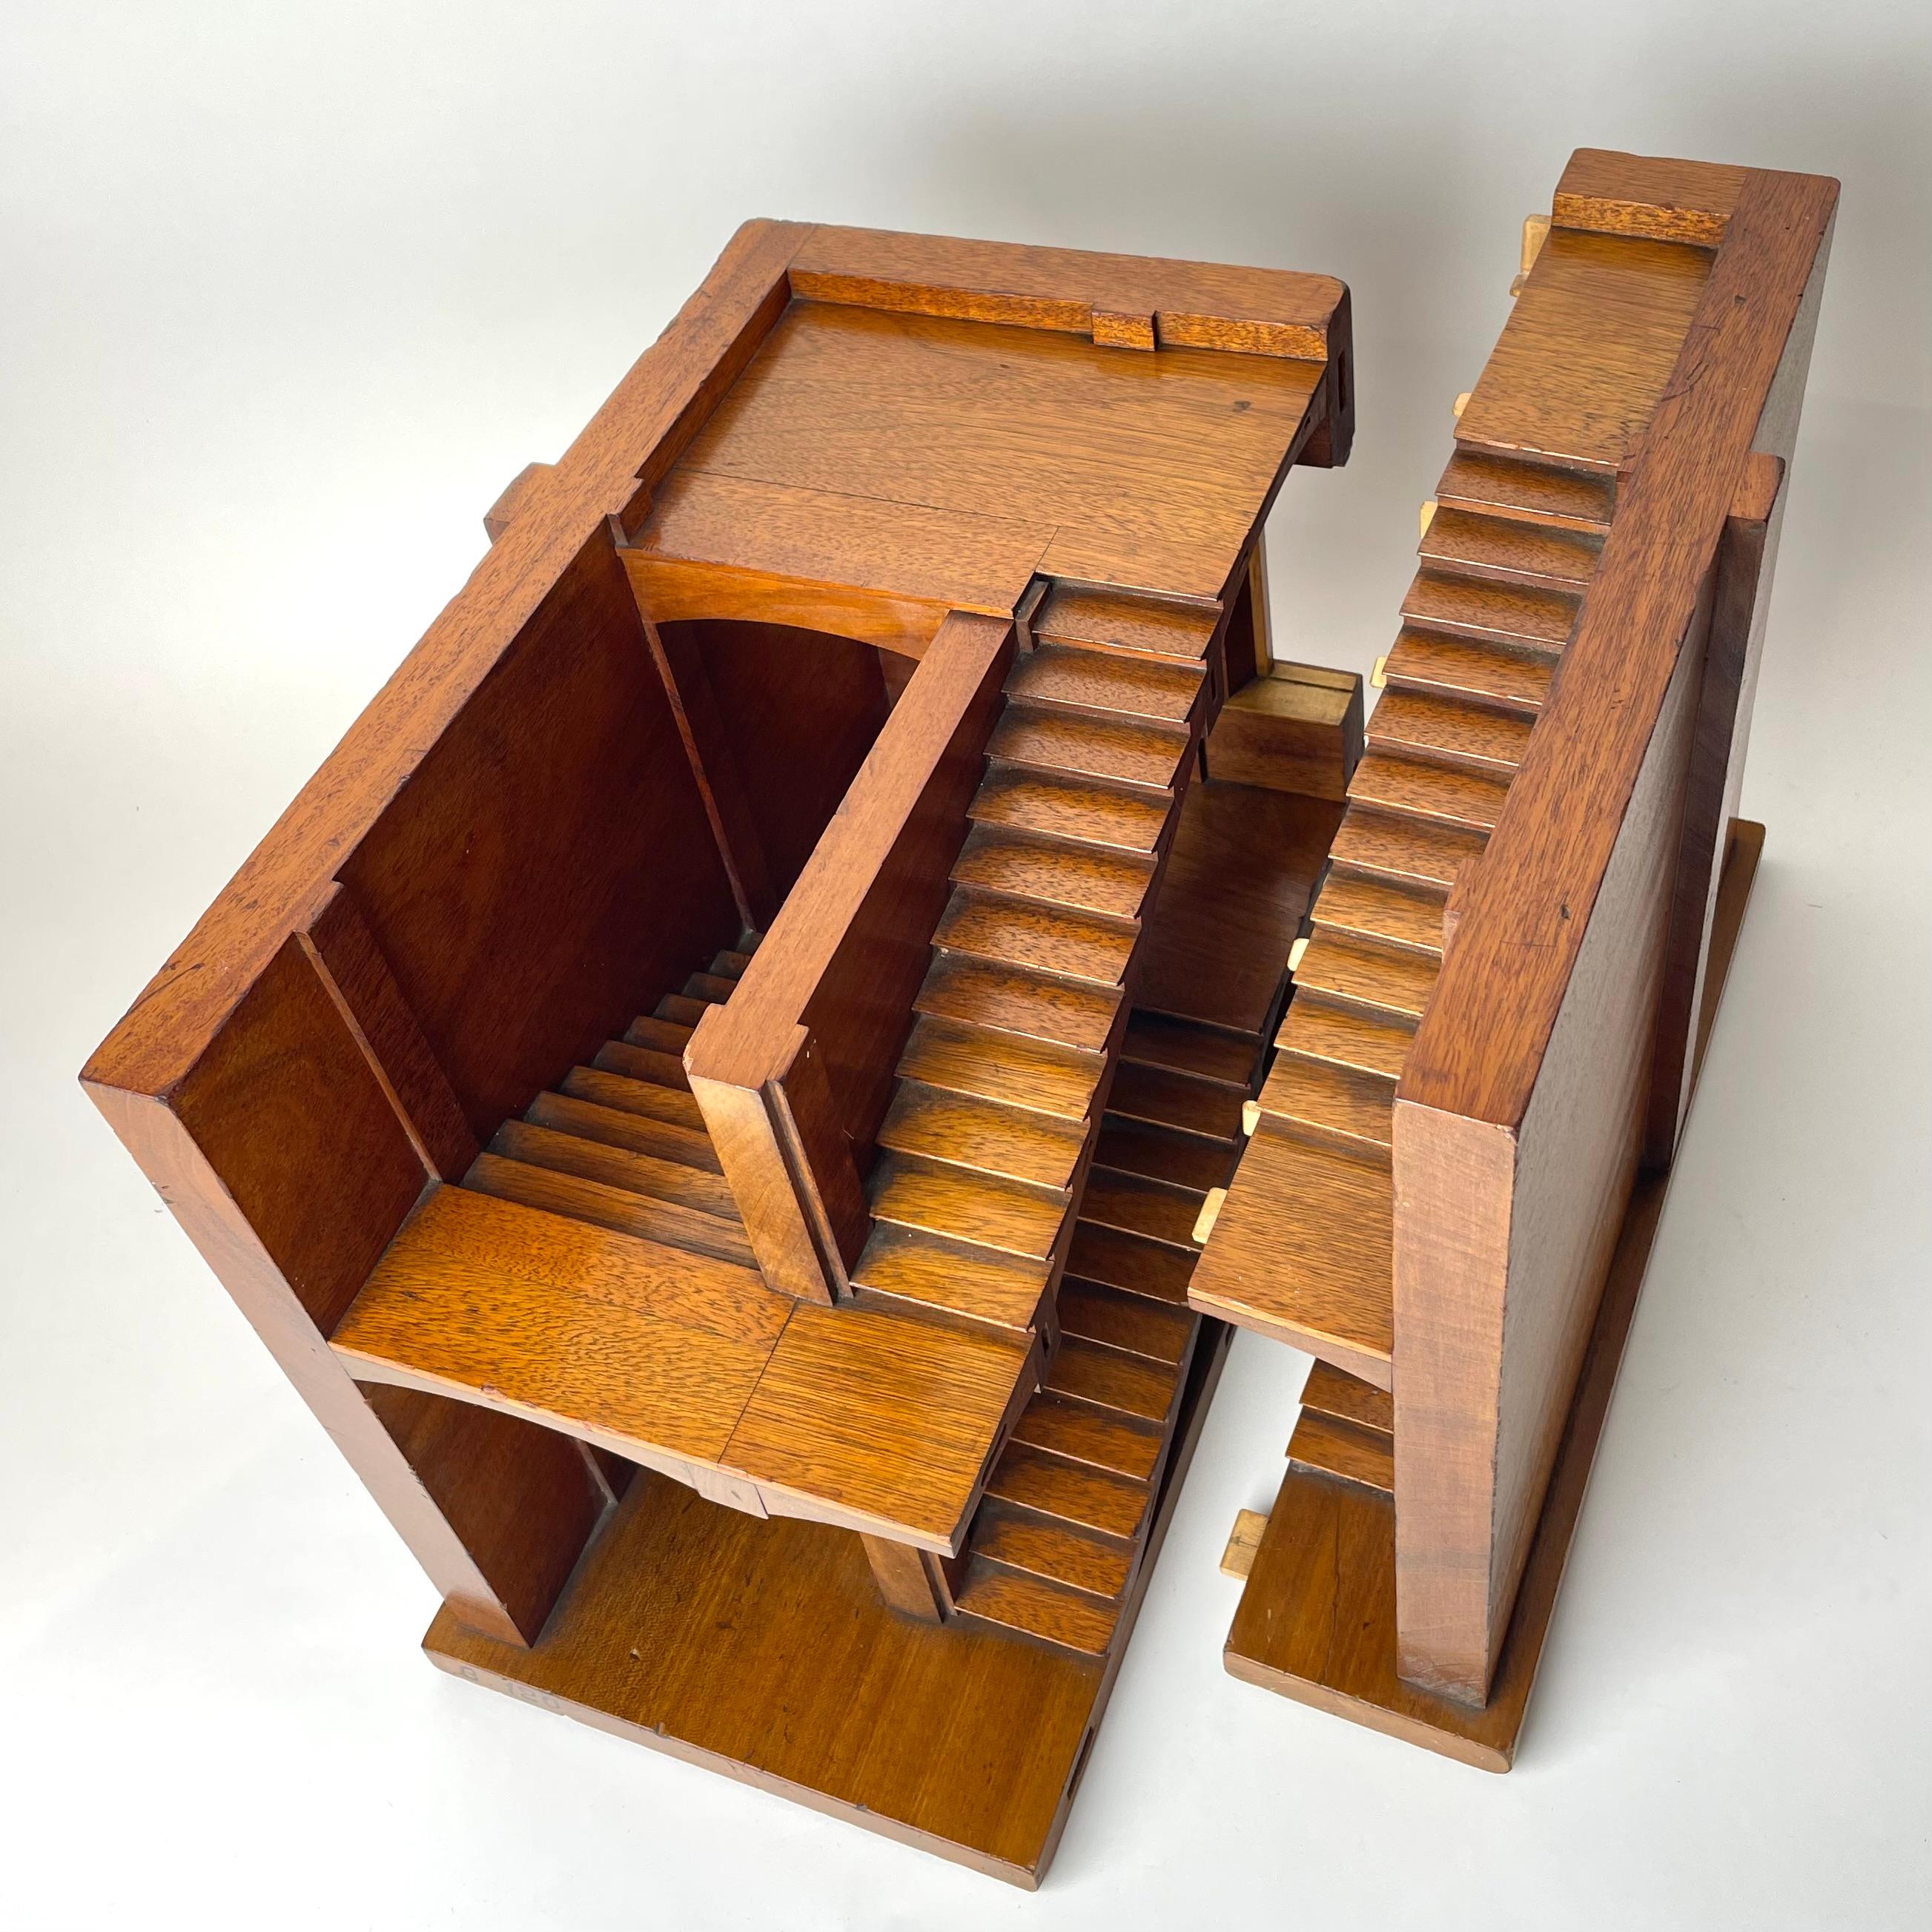 English Mahogany Staircase Section Architectural Model, Late 19th/Early 20th C England. For Sale